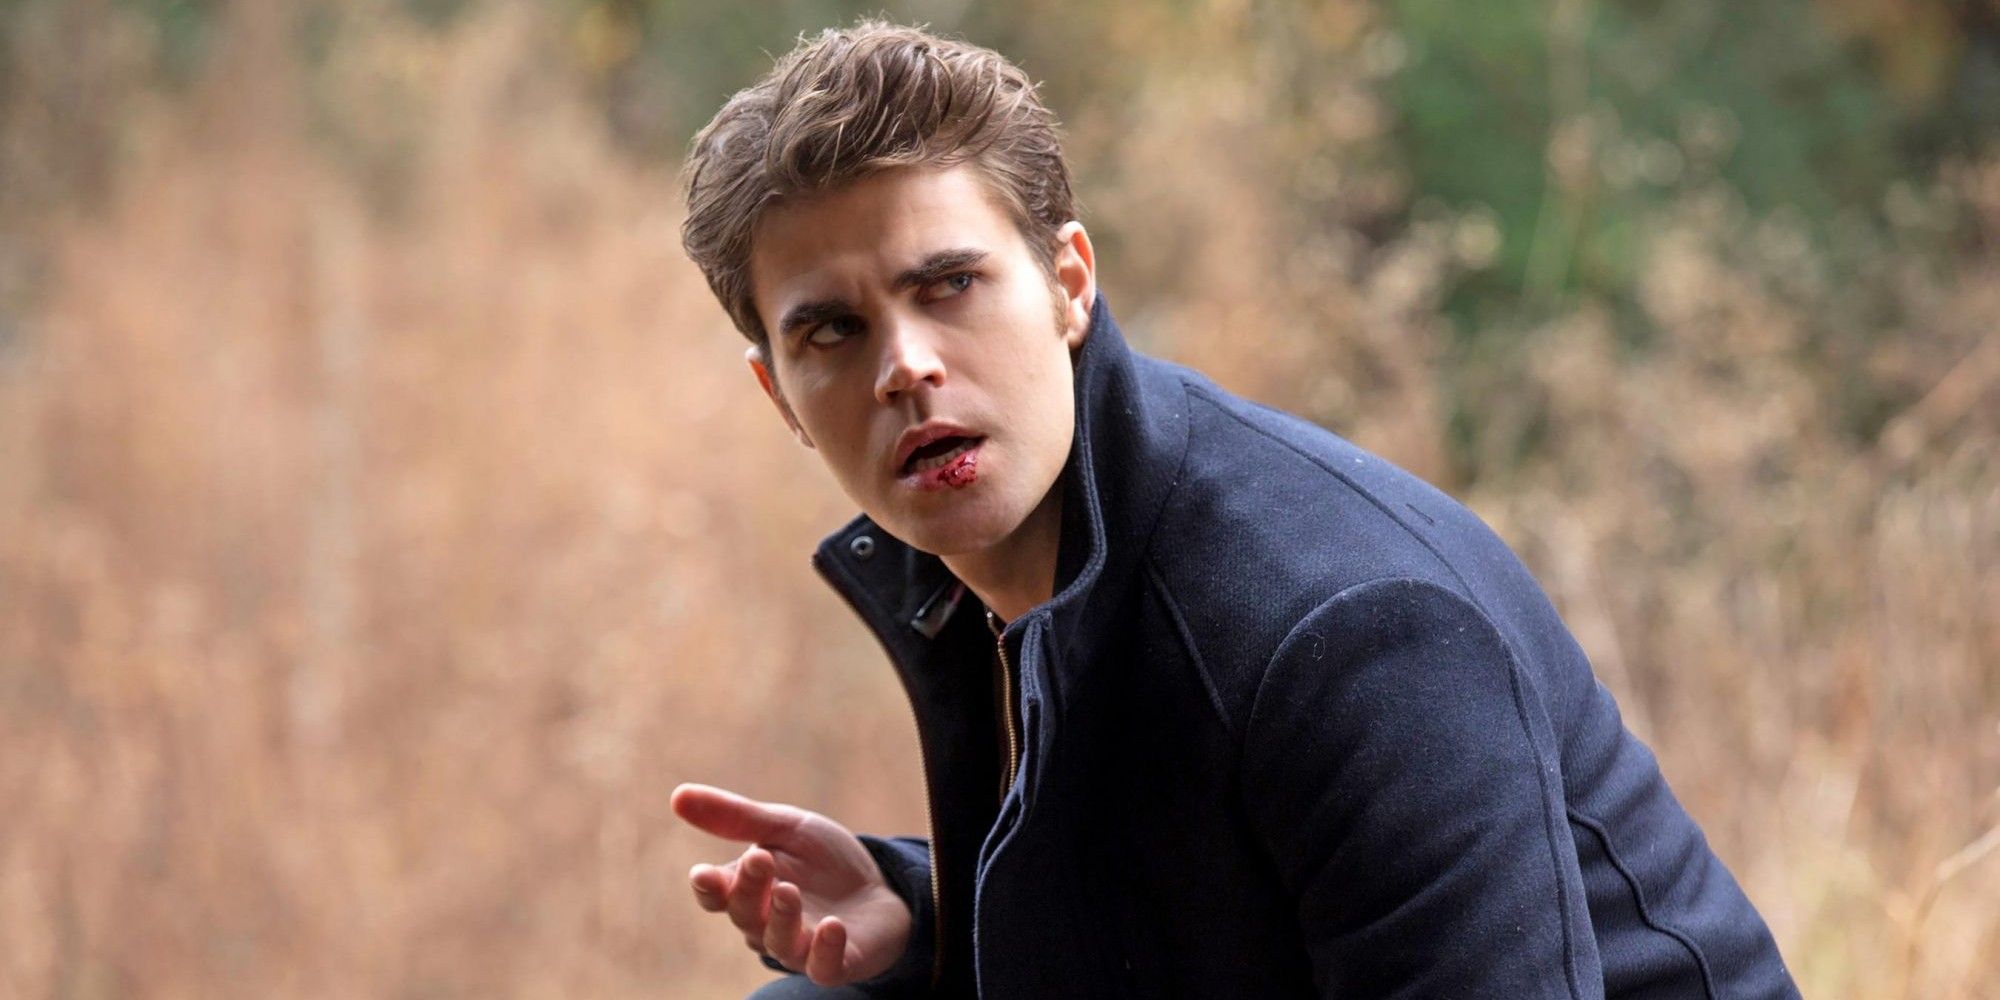 Stefan with blood on his lips in the Vampire Diaries